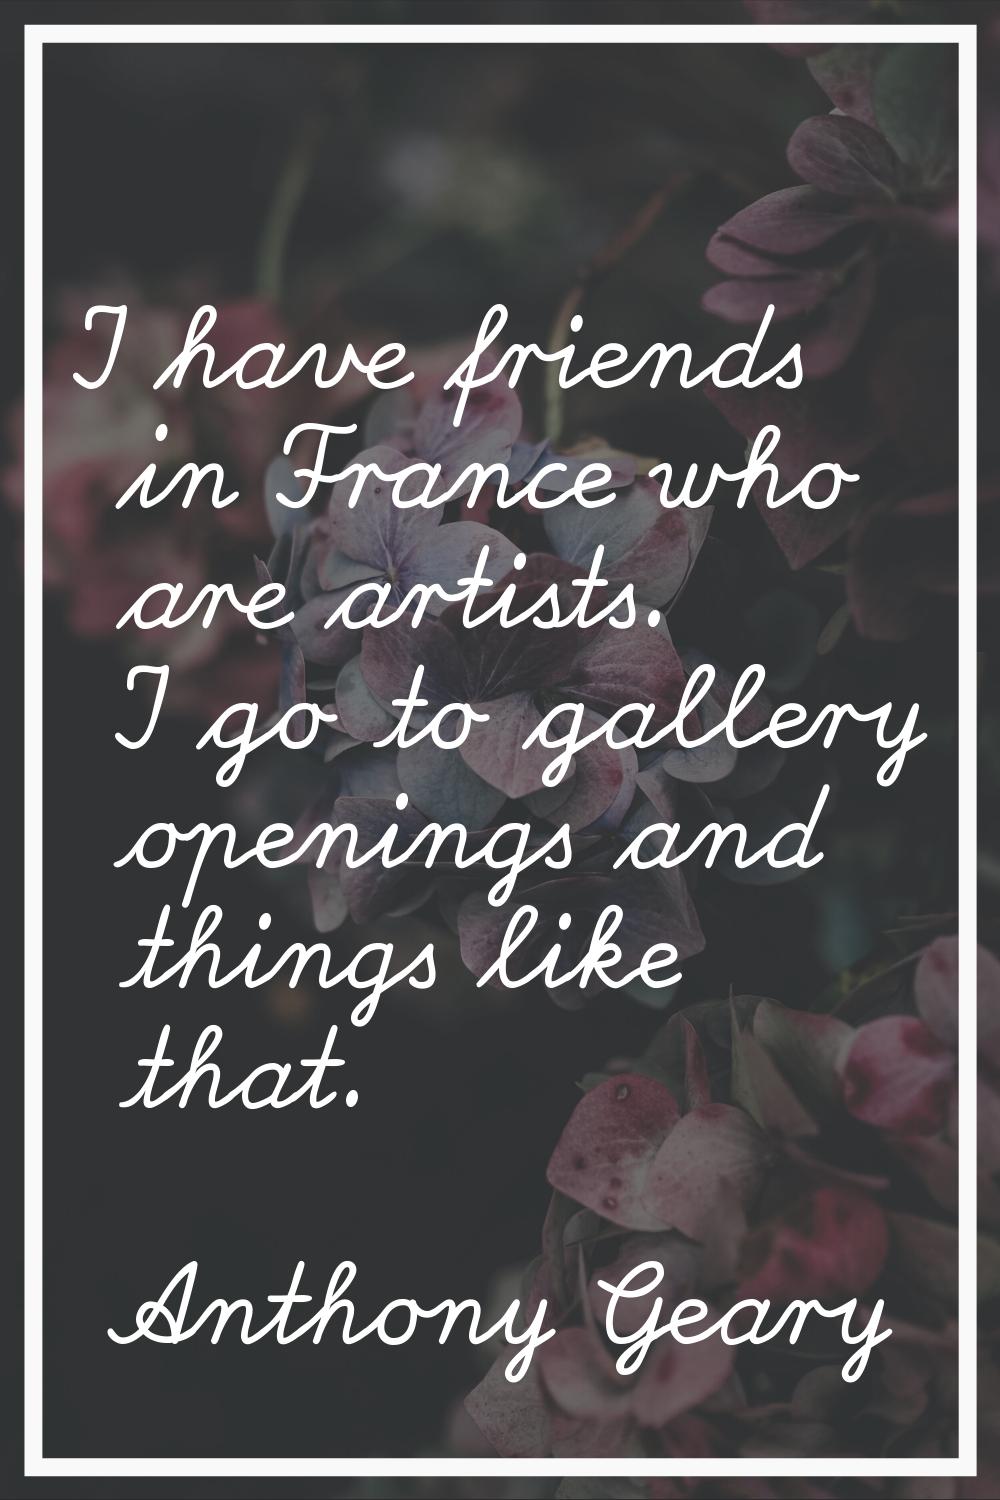 I have friends in France who are artists. I go to gallery openings and things like that.